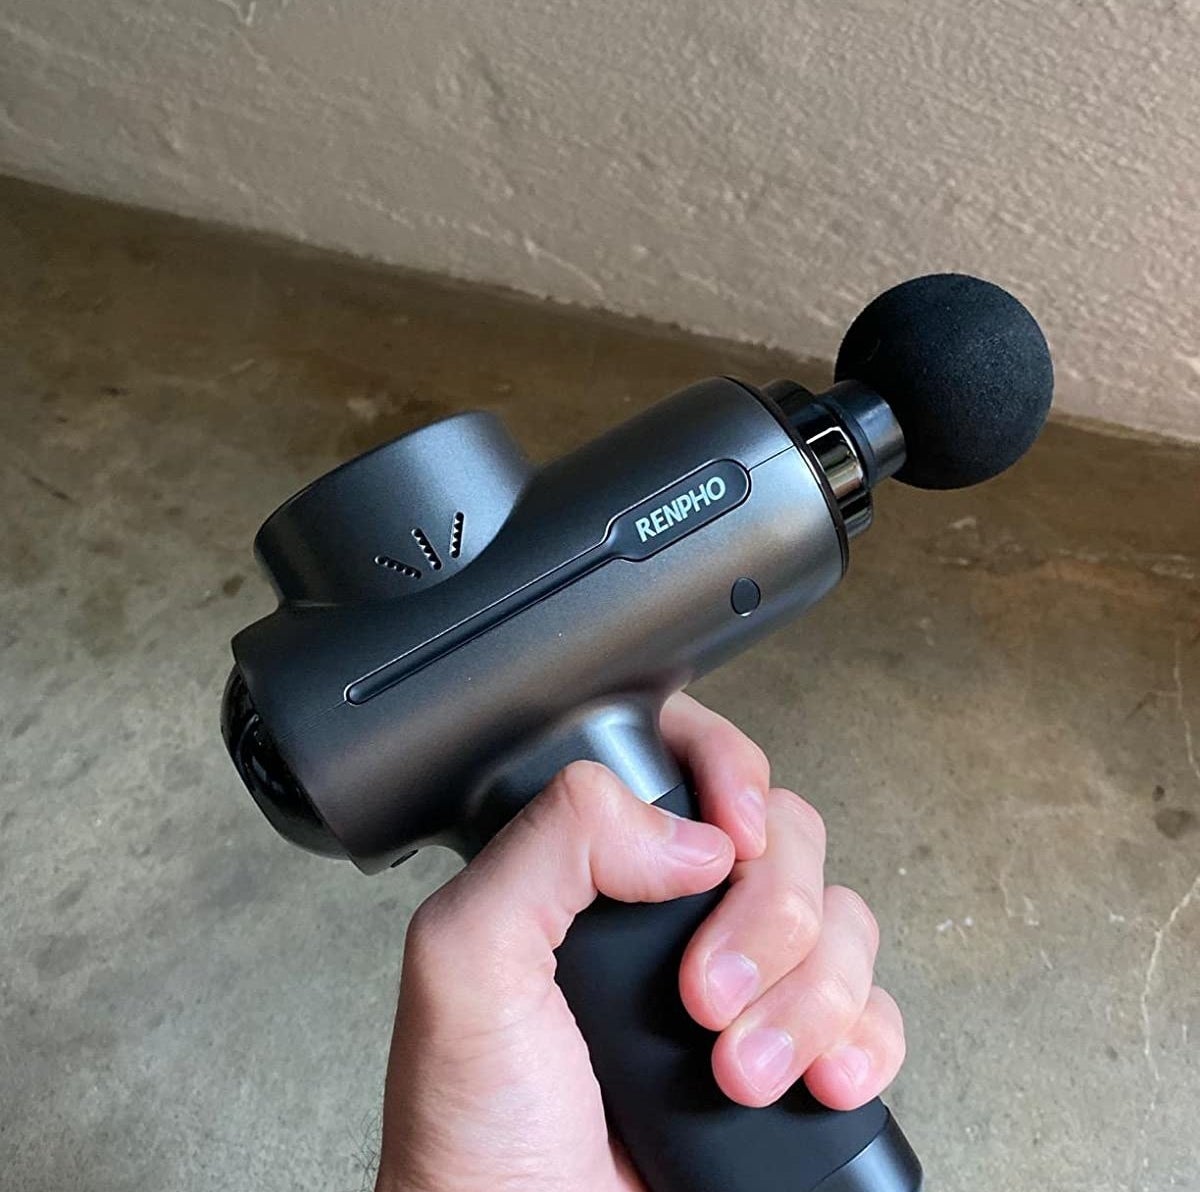 A person holding the handle of a black massage gun